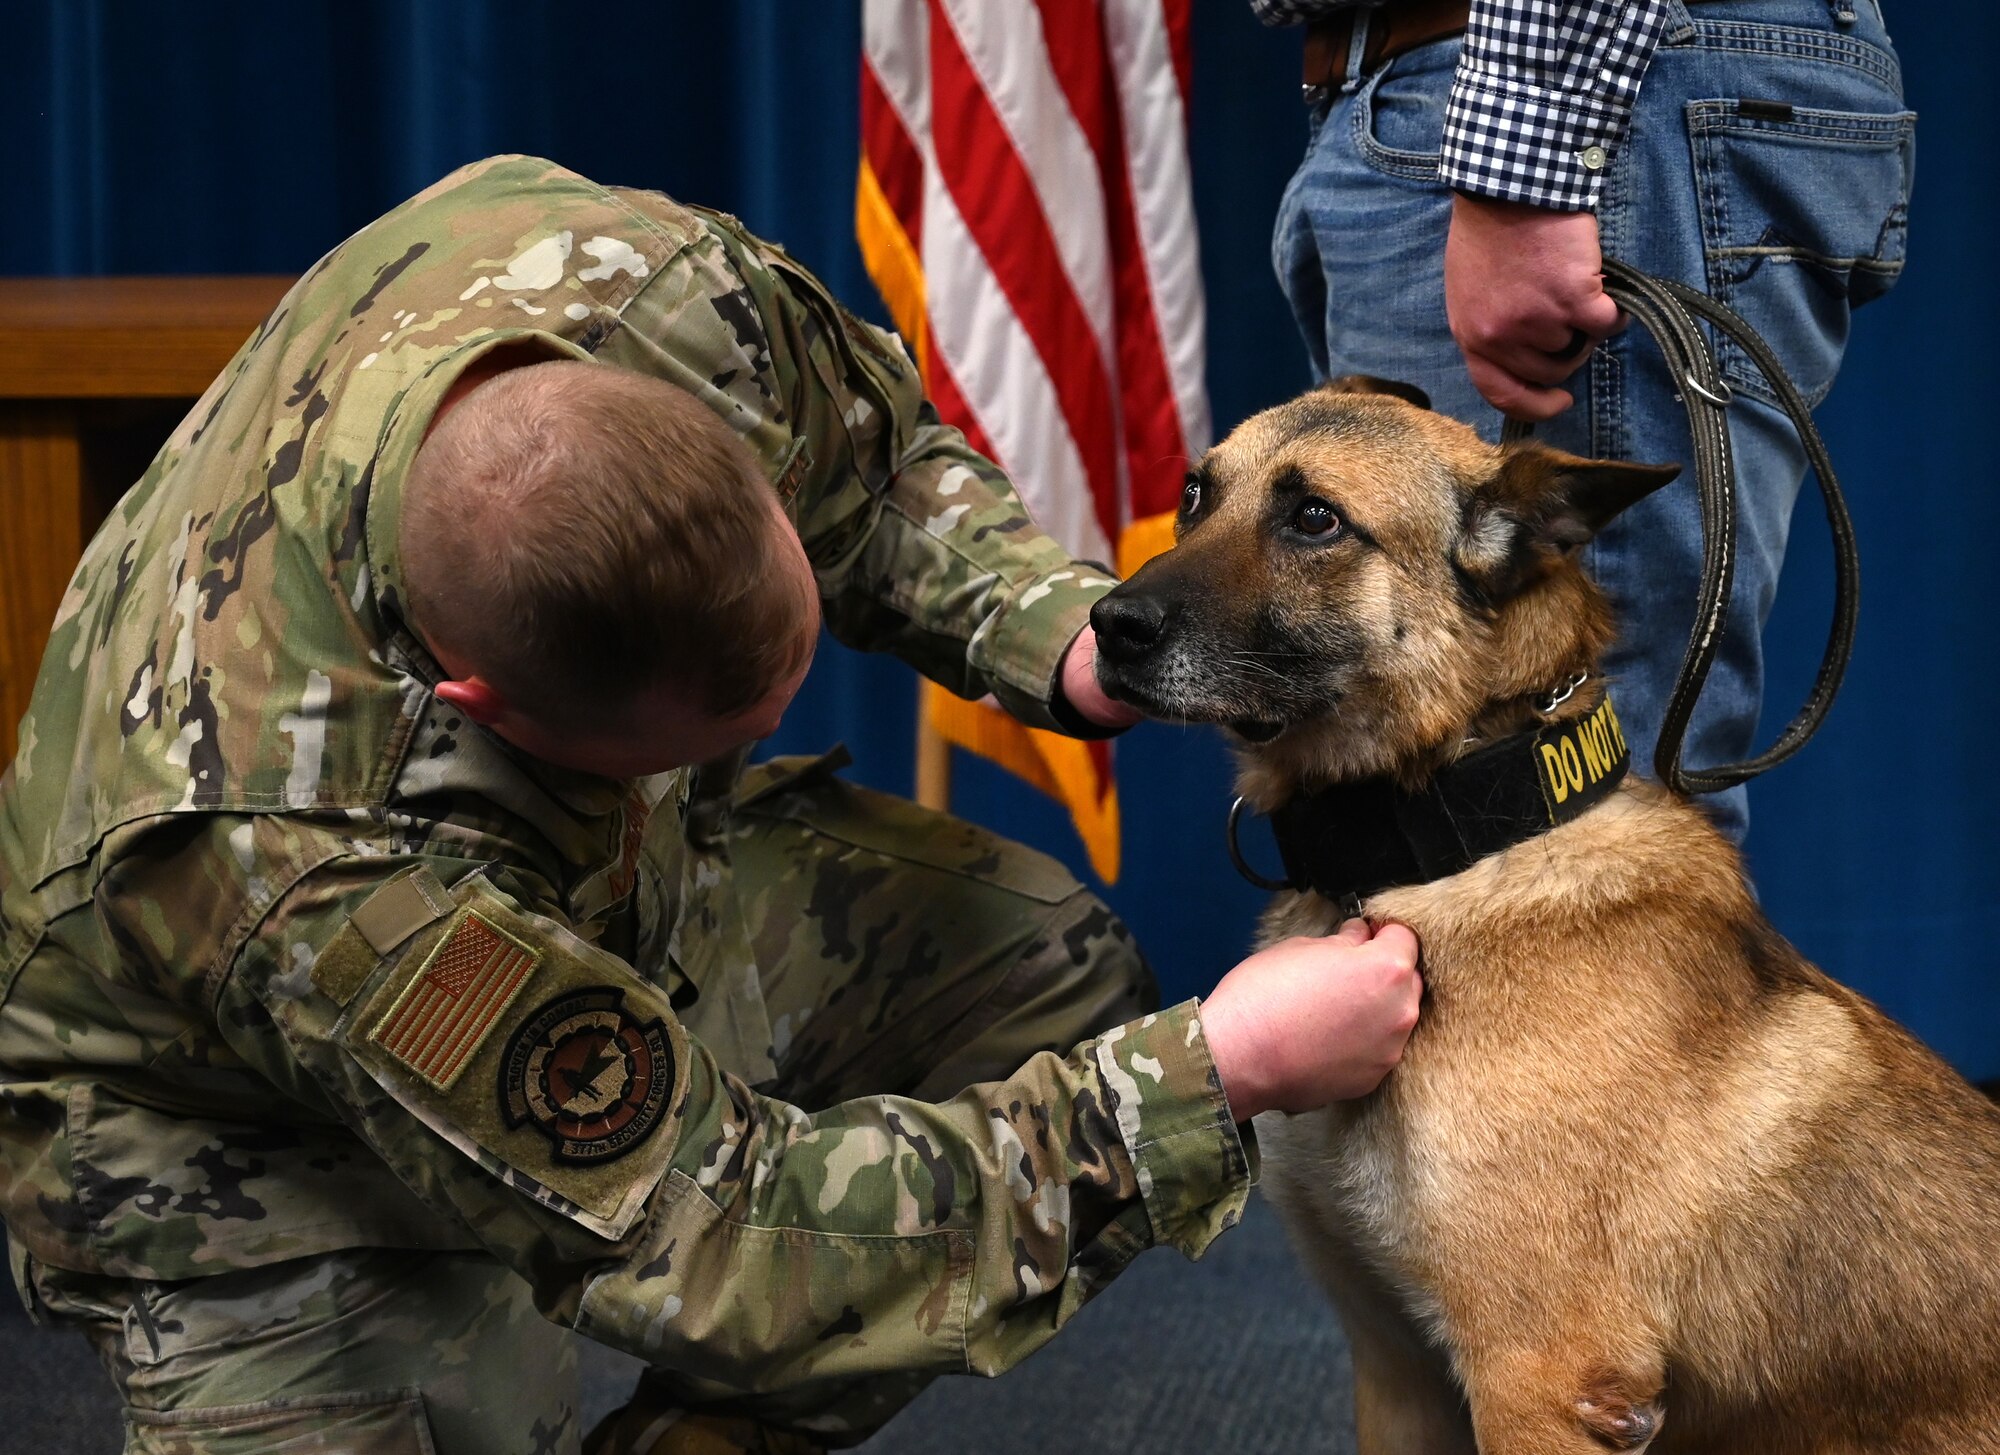 A man pins a medal on a dogs collar.